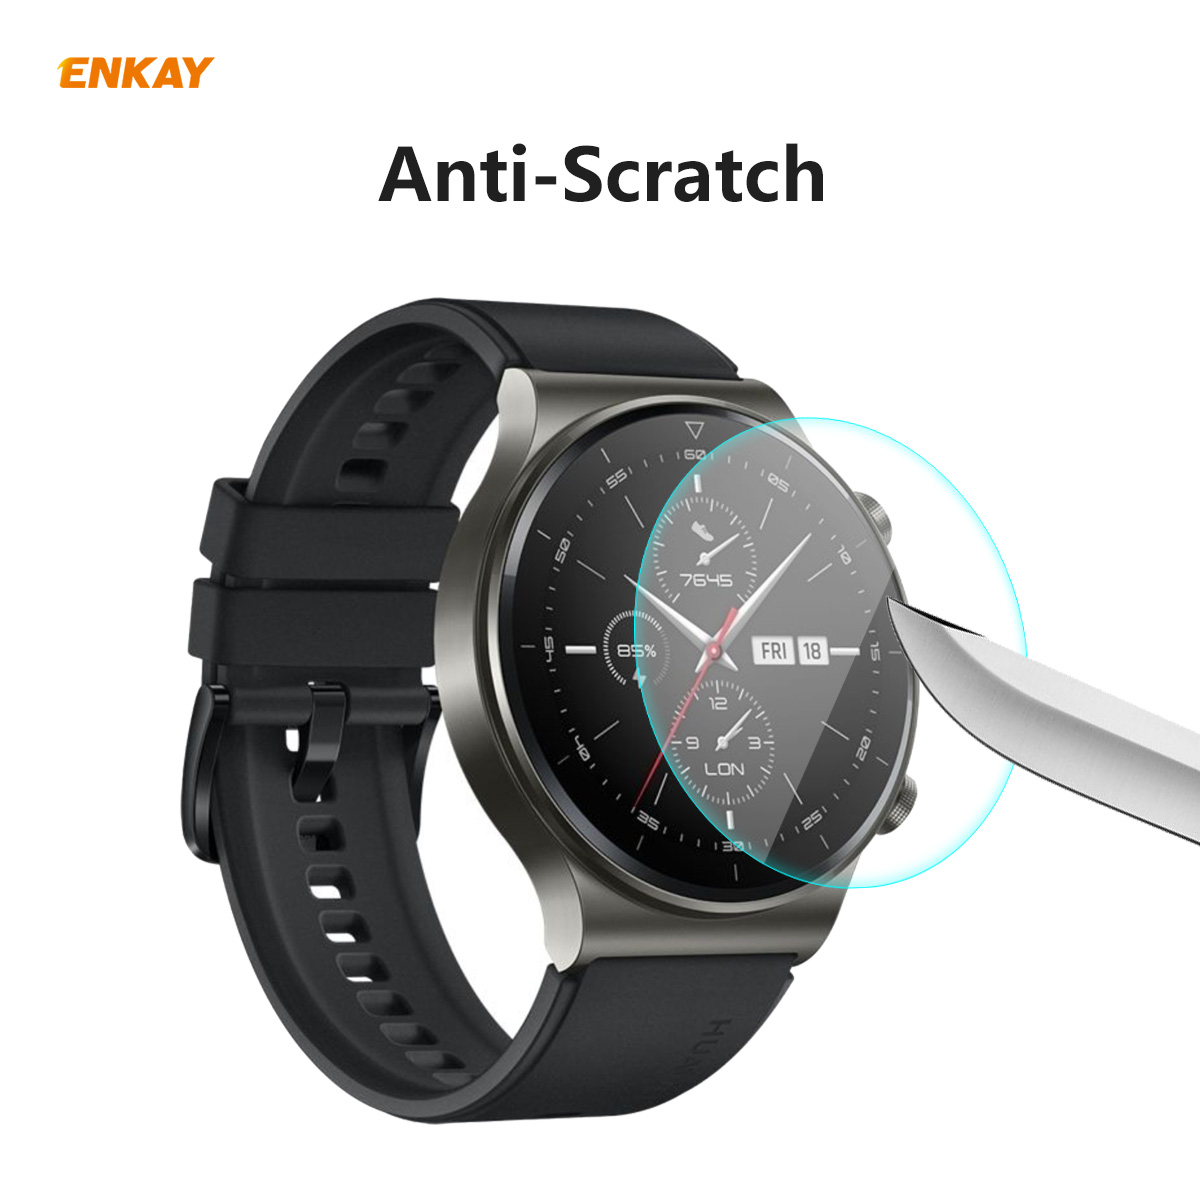 ENKAY-02mm-9H-215D-Tempered-Glass-Protective-Film-Watch-Screen-Protector-for-Huawei-Watch-GT2-Pro-1763793-1